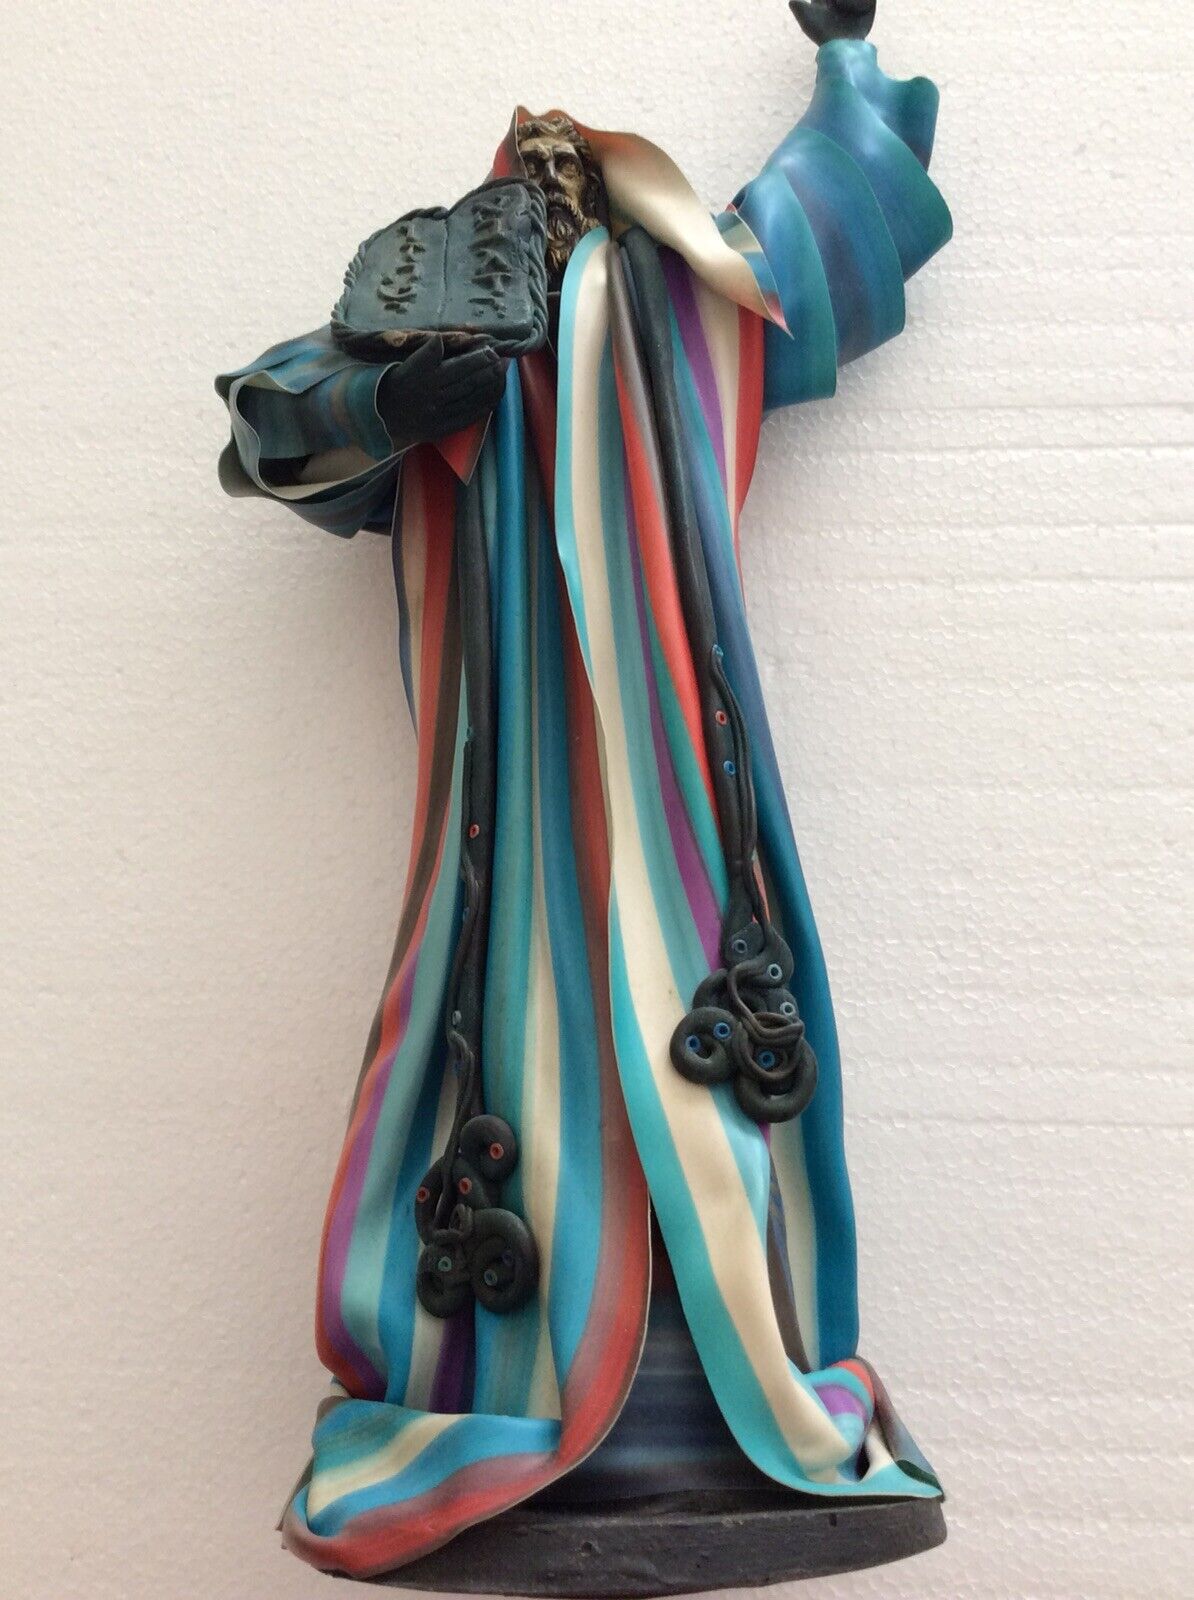 Ugly Moses Figurine very colorful & unusual